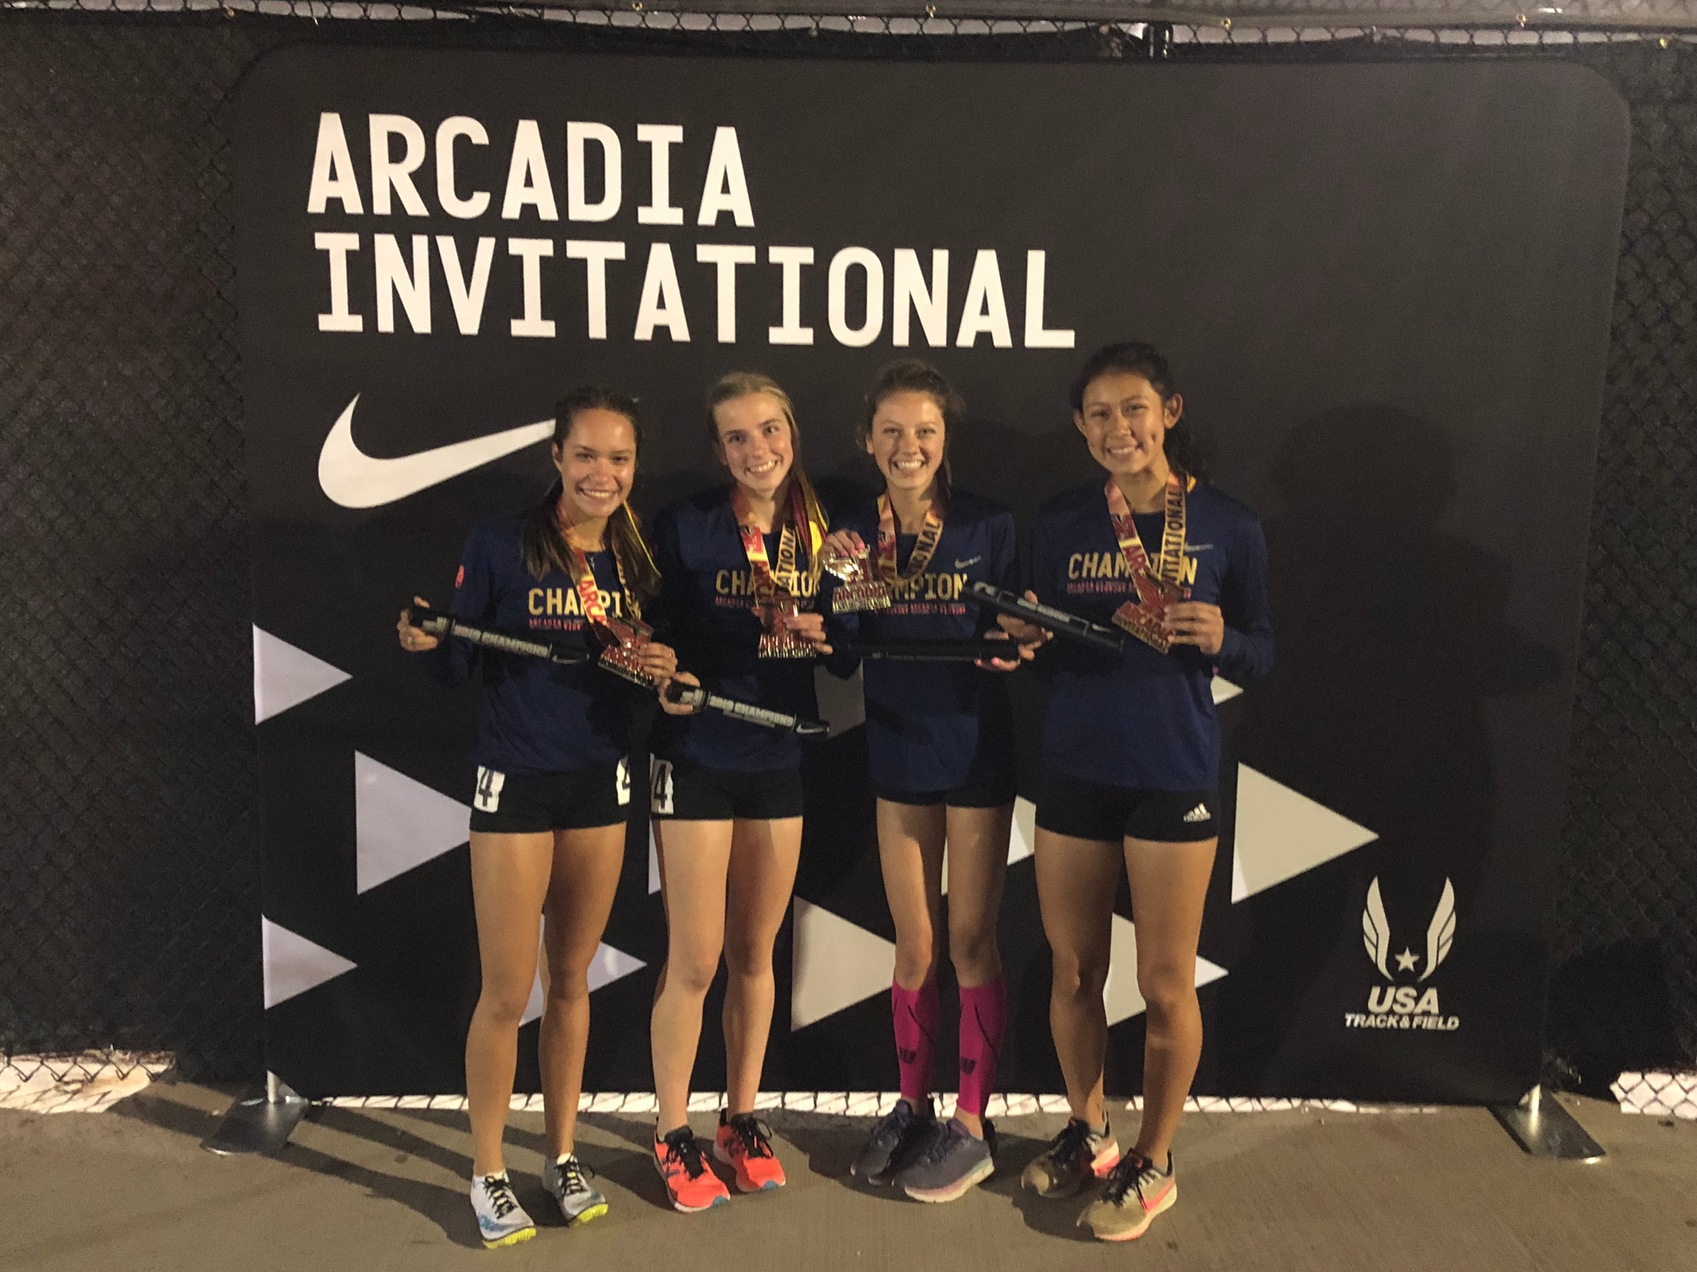 4x1600 Wins at Arcadia Invitational, Breaks School Record with National-best Time